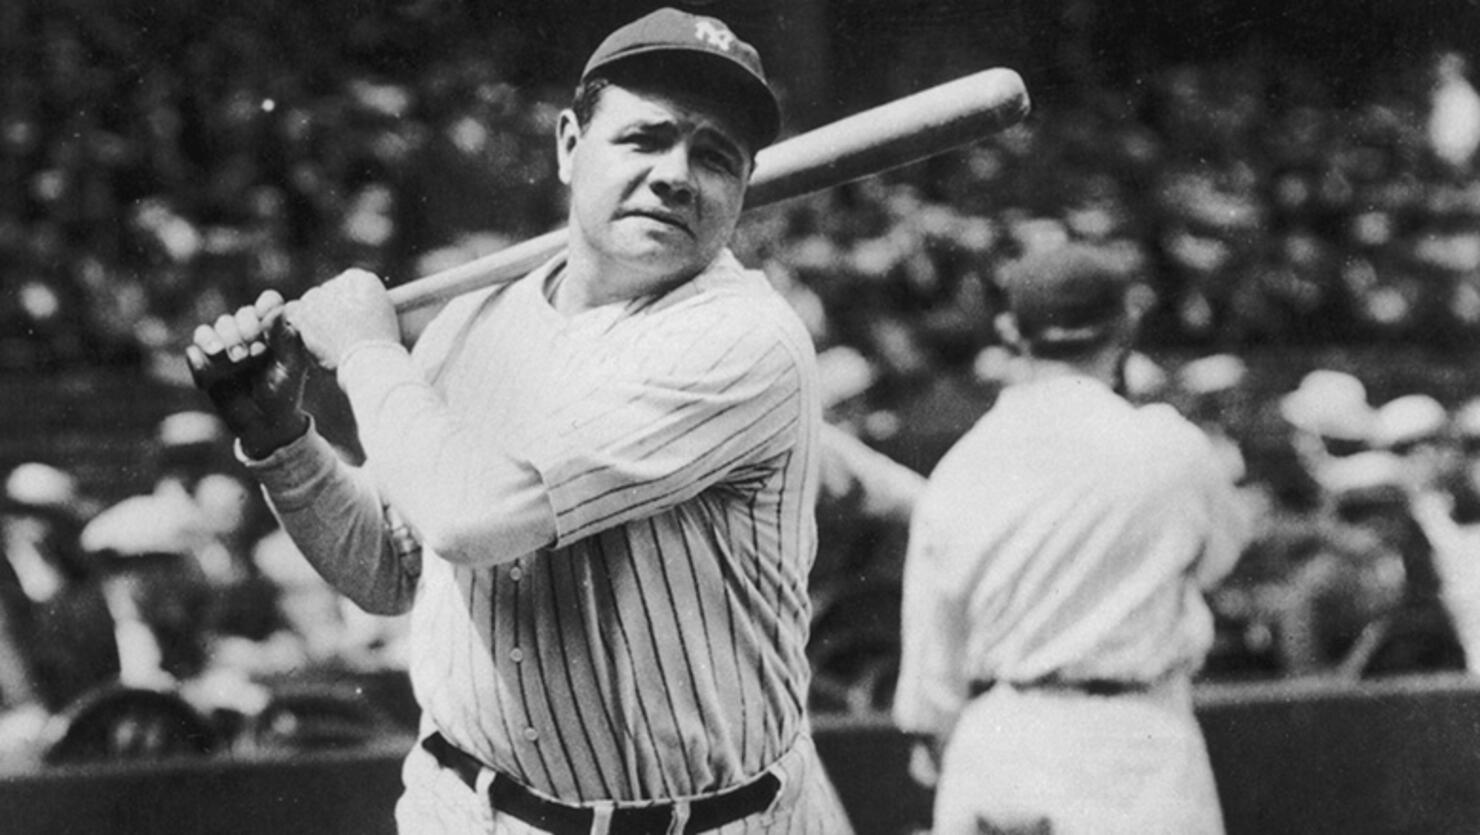 Major League Reliever Claims He Would \u0026#39;Strike Babe Ruth Out Every Time\u0026#39; | iHeart